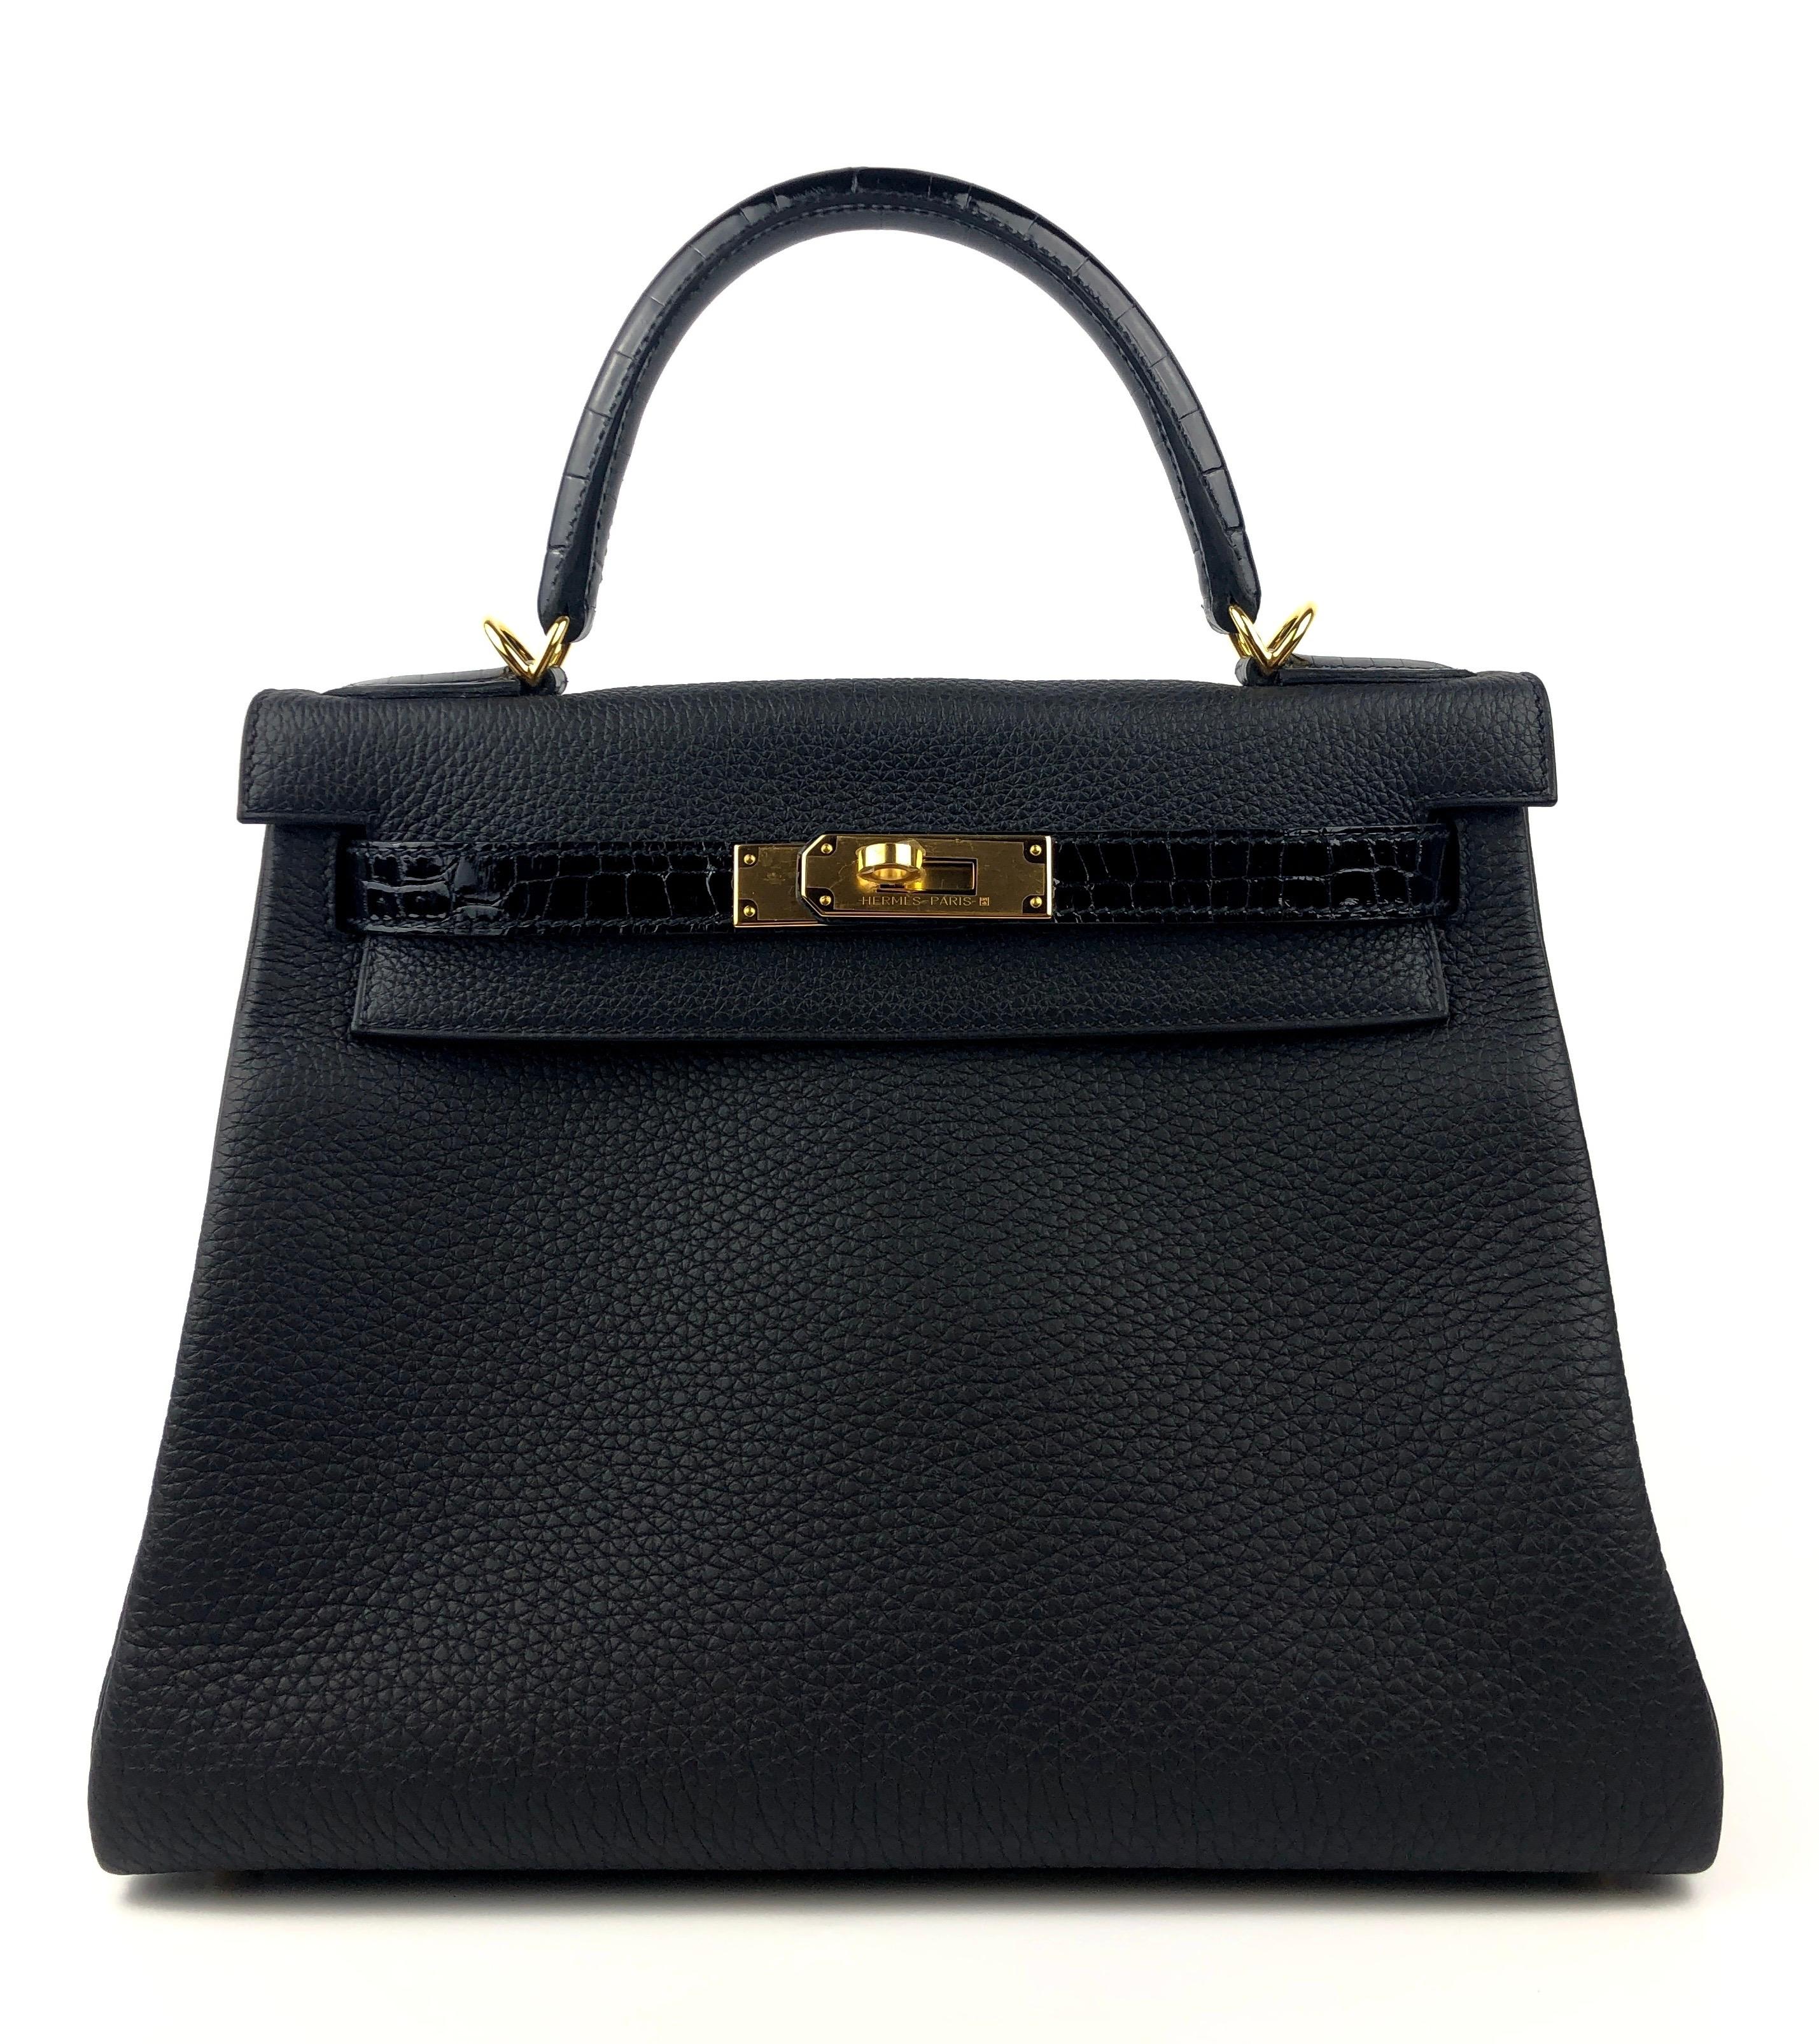 Brand New 2021 Rare Hermes Kelly 28 Touch Black Leather and Crocodile Gold Hardware. Full set with copy of receipt and cites. 

Shop with Confidence from Lux Addicts. Authenticity Guaranteed! 